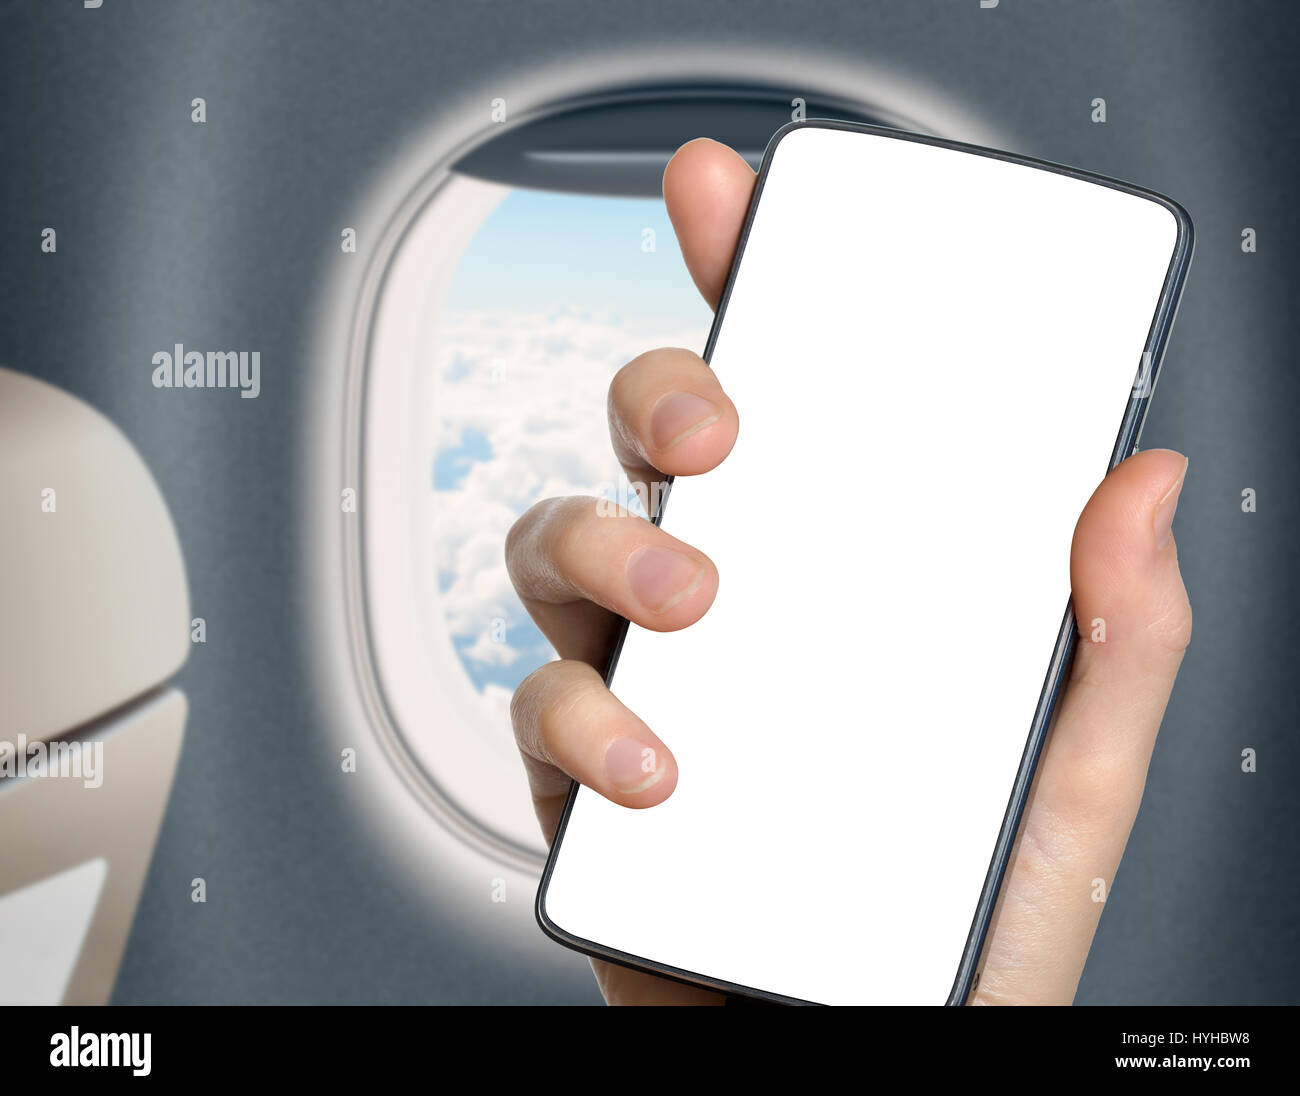 hand with blank mobile phone in airplane or jet interior Stock Photo